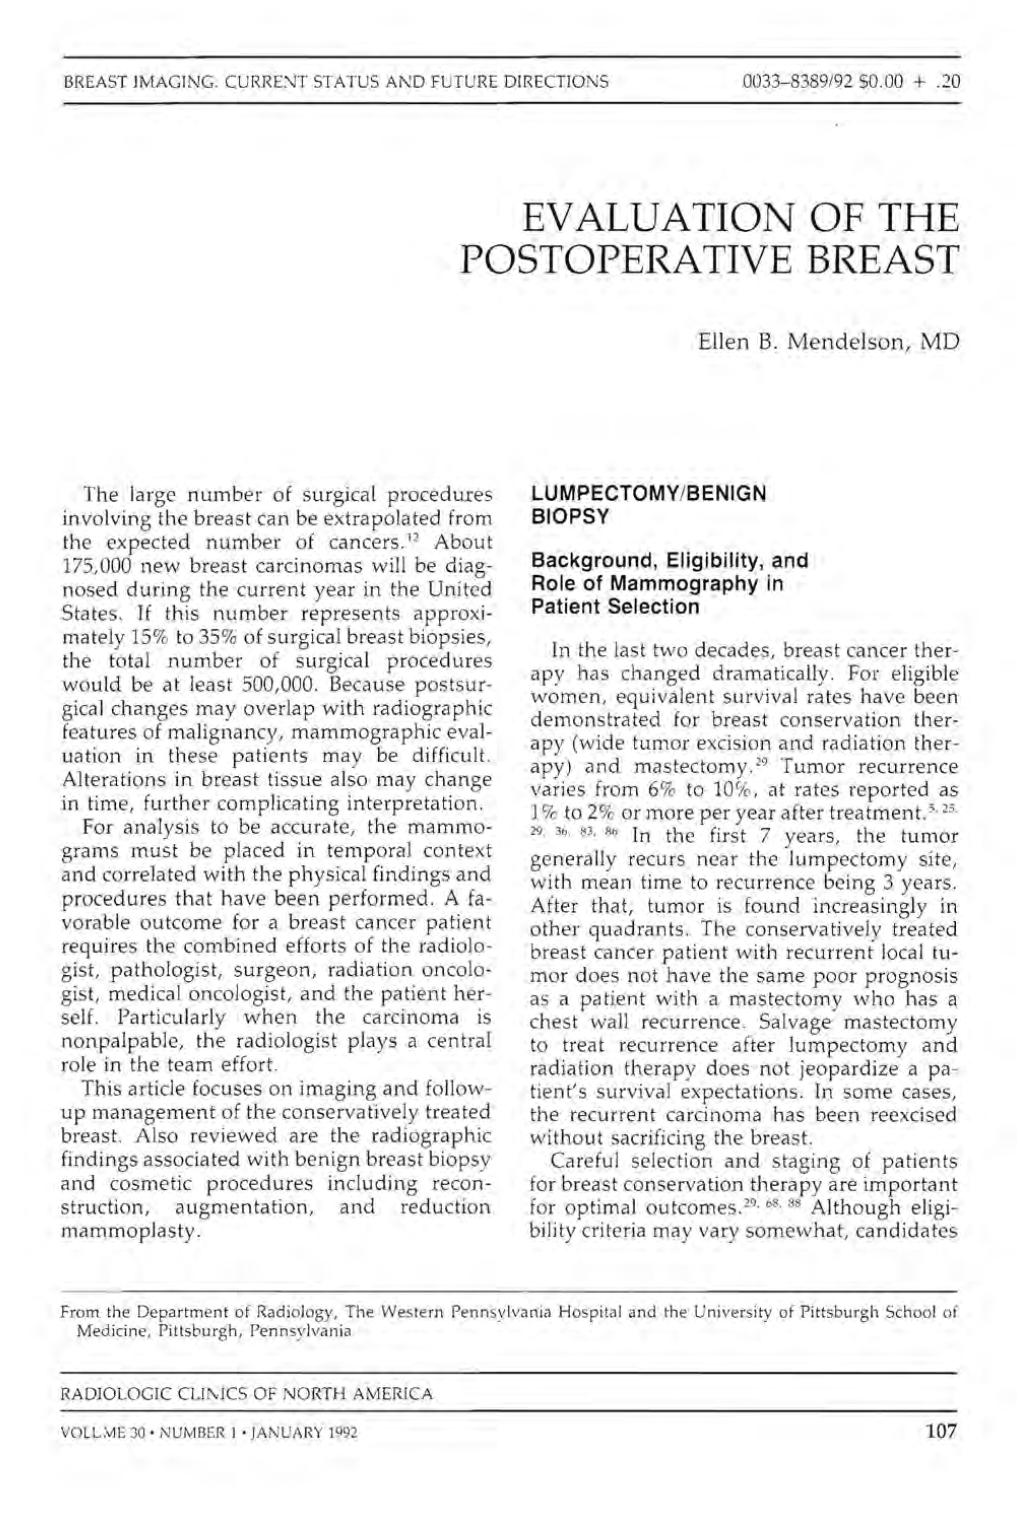 Evaluation of the Postoperative Breast